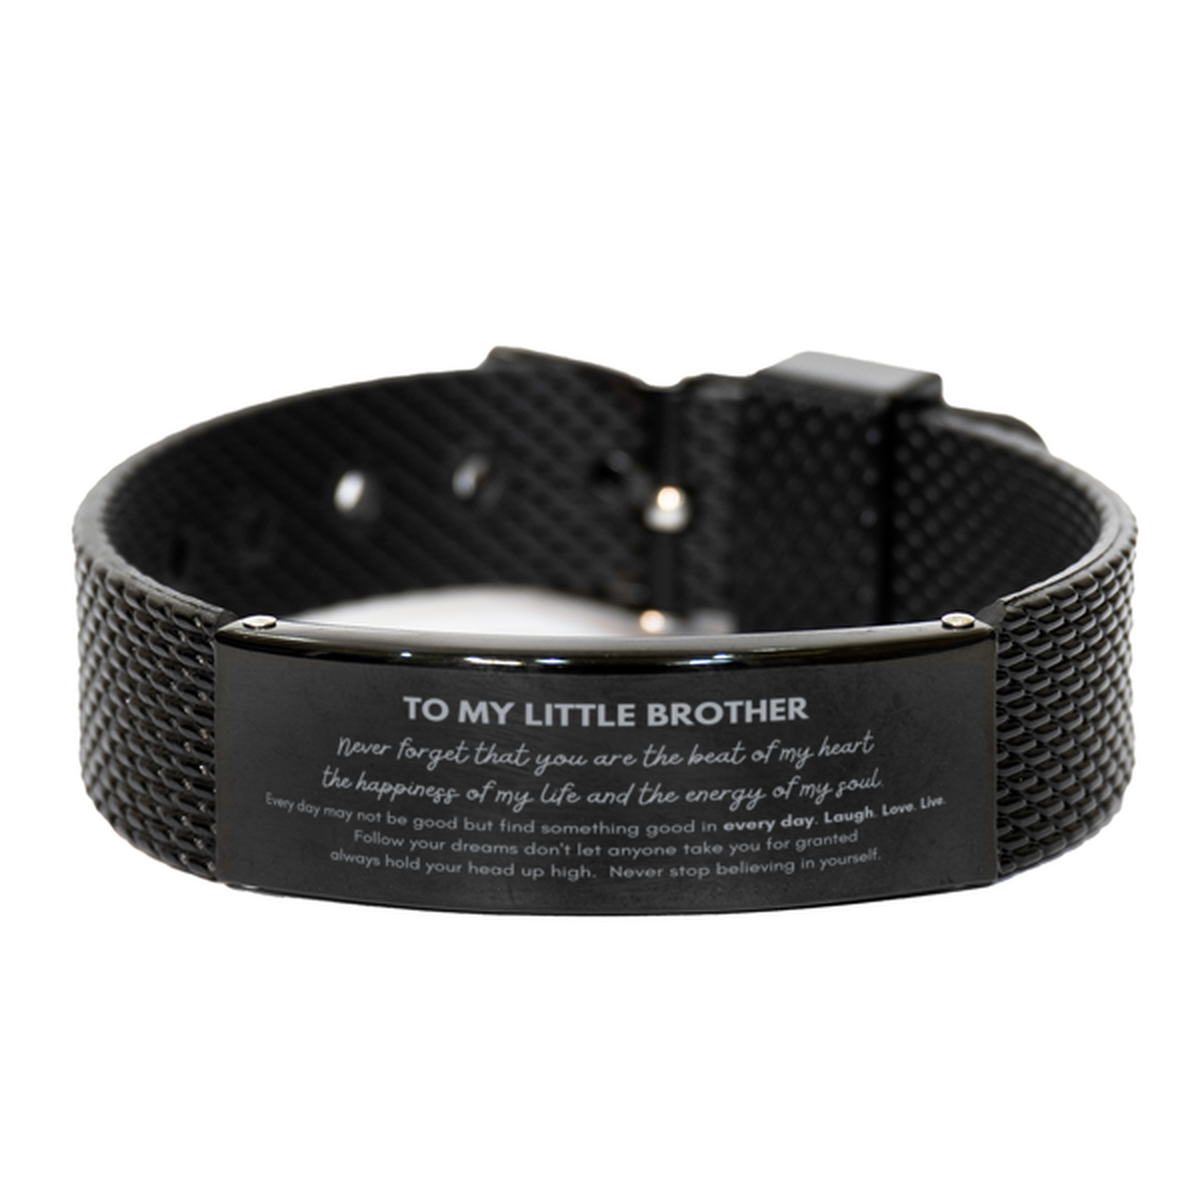 To My Little Brother Bracelet Gifts, Christmas Little Brother Black Shark Mesh Bracelet Present, Birthday Unique Motivational For Little Brother, To My Little Brother Never forget that you are the beat of my heart the happiness of my life and the energy o